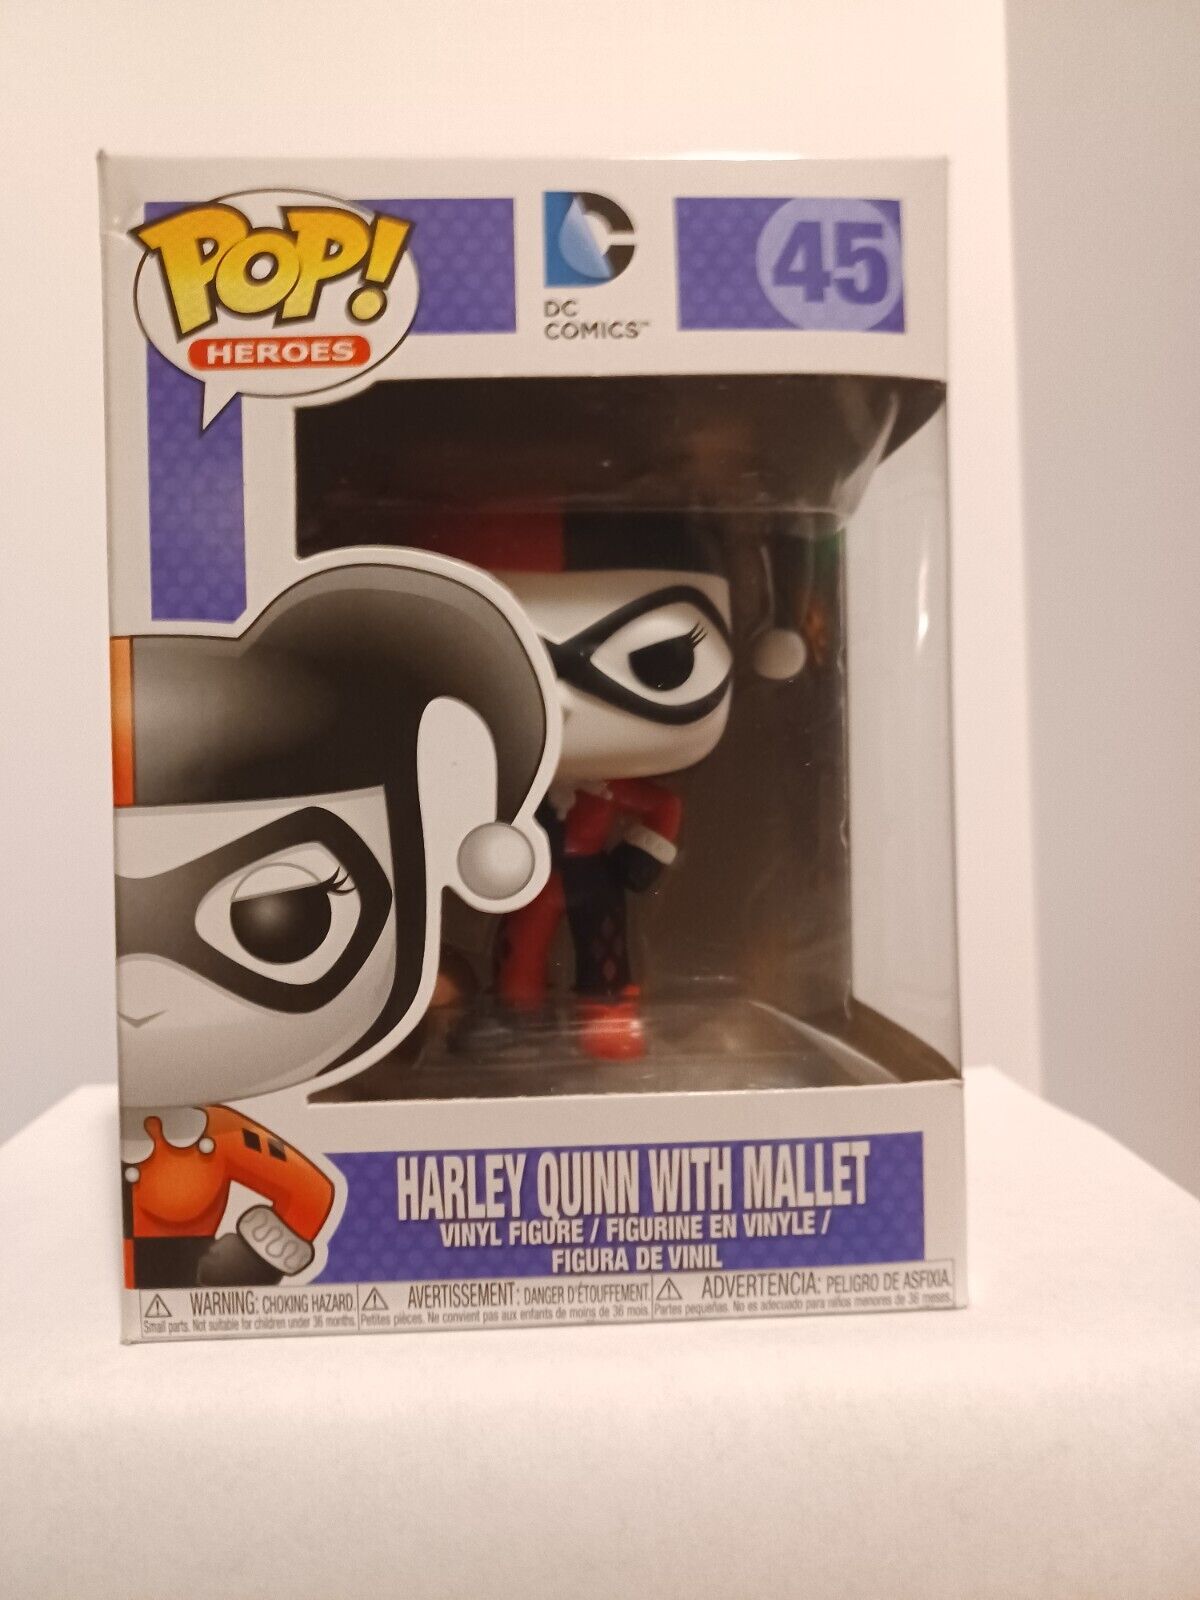 Harley Quinn with Mallet #45 DC Comics Funko Pop Figure Heroes 